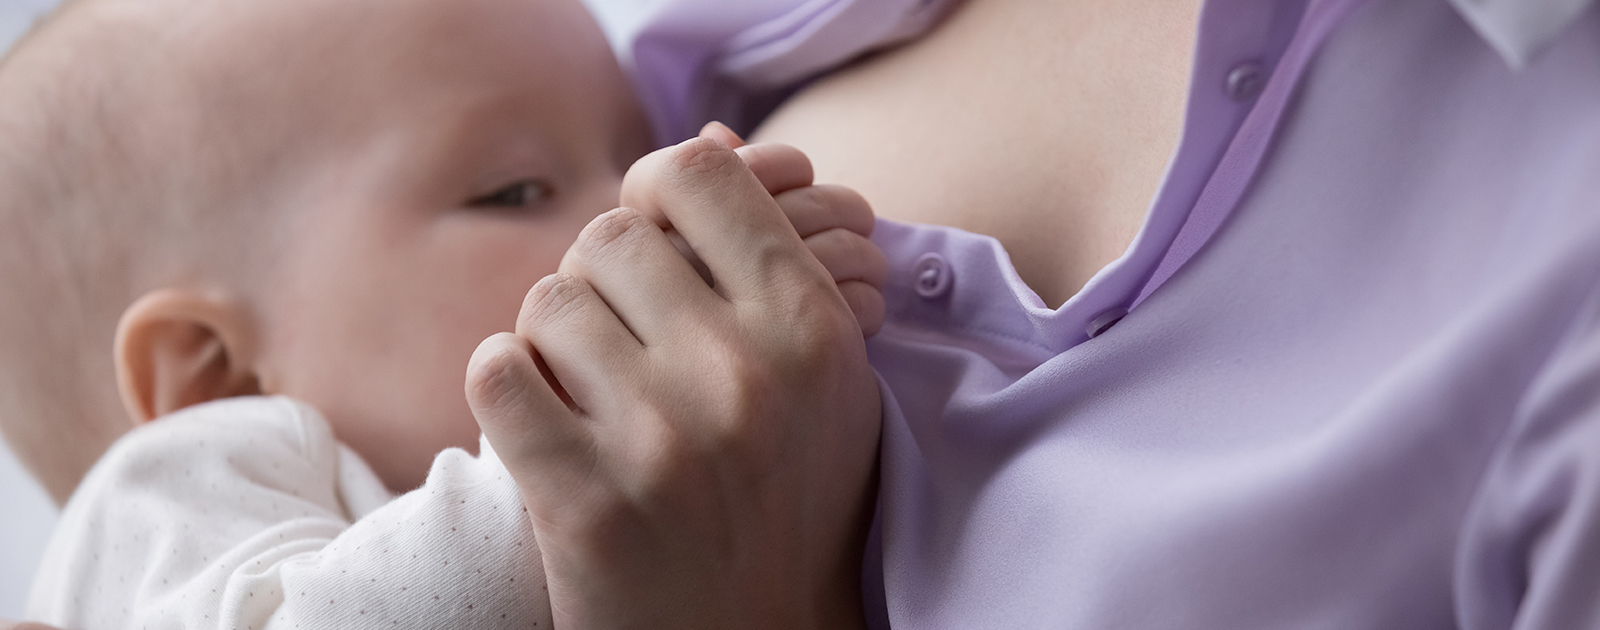 Busted: 14 myths about breastfeeding